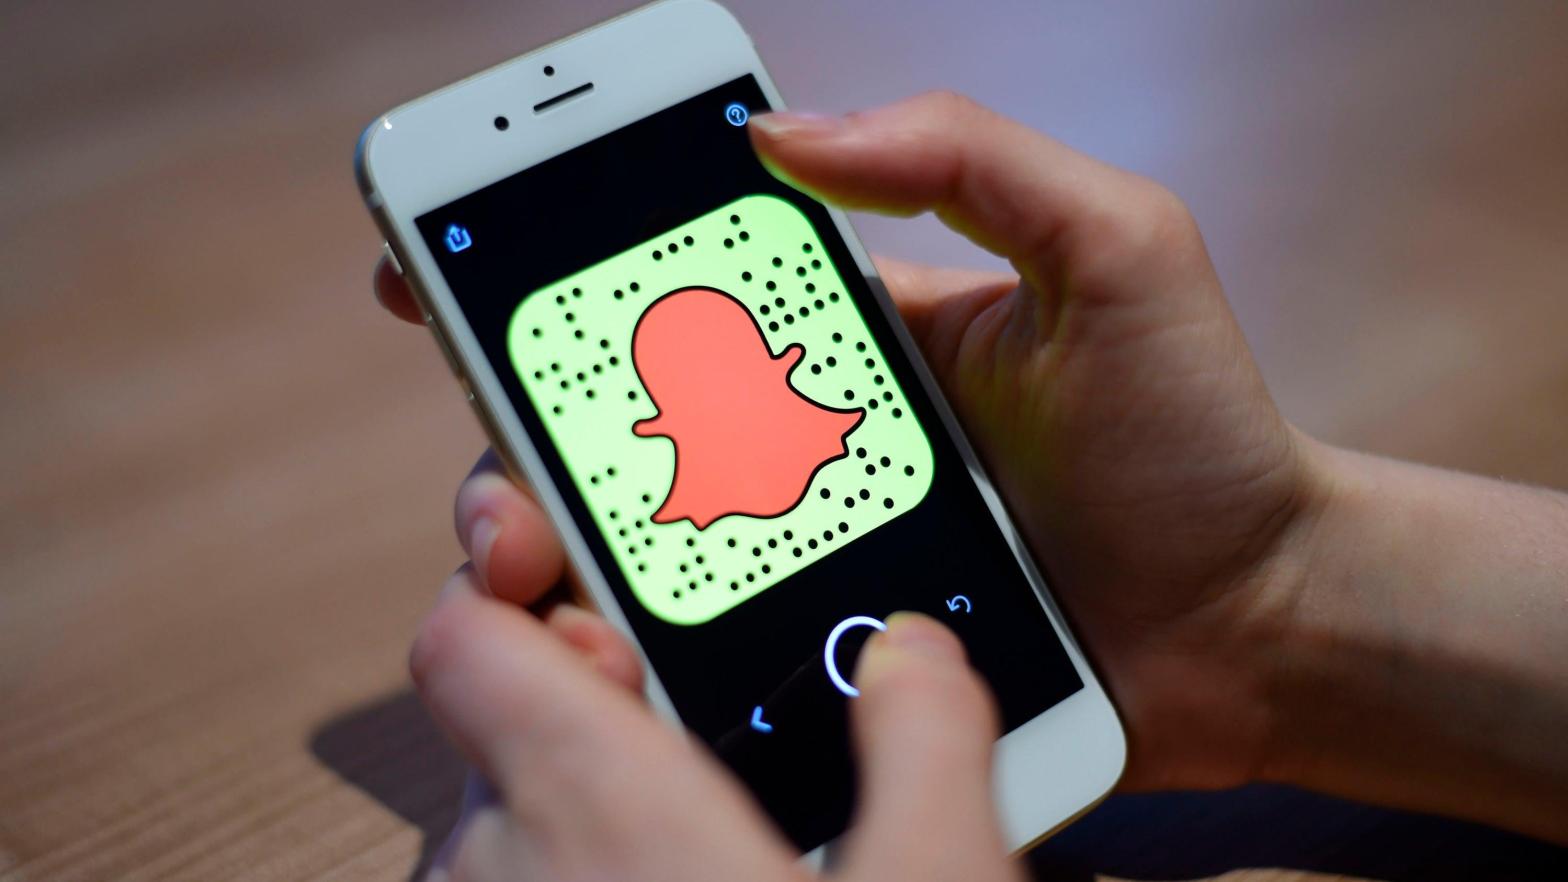 Snapchat is mainly popular with the Gen-Z generation born between 1995 and 2010. (Image: Kirsty O’Connor, AP)